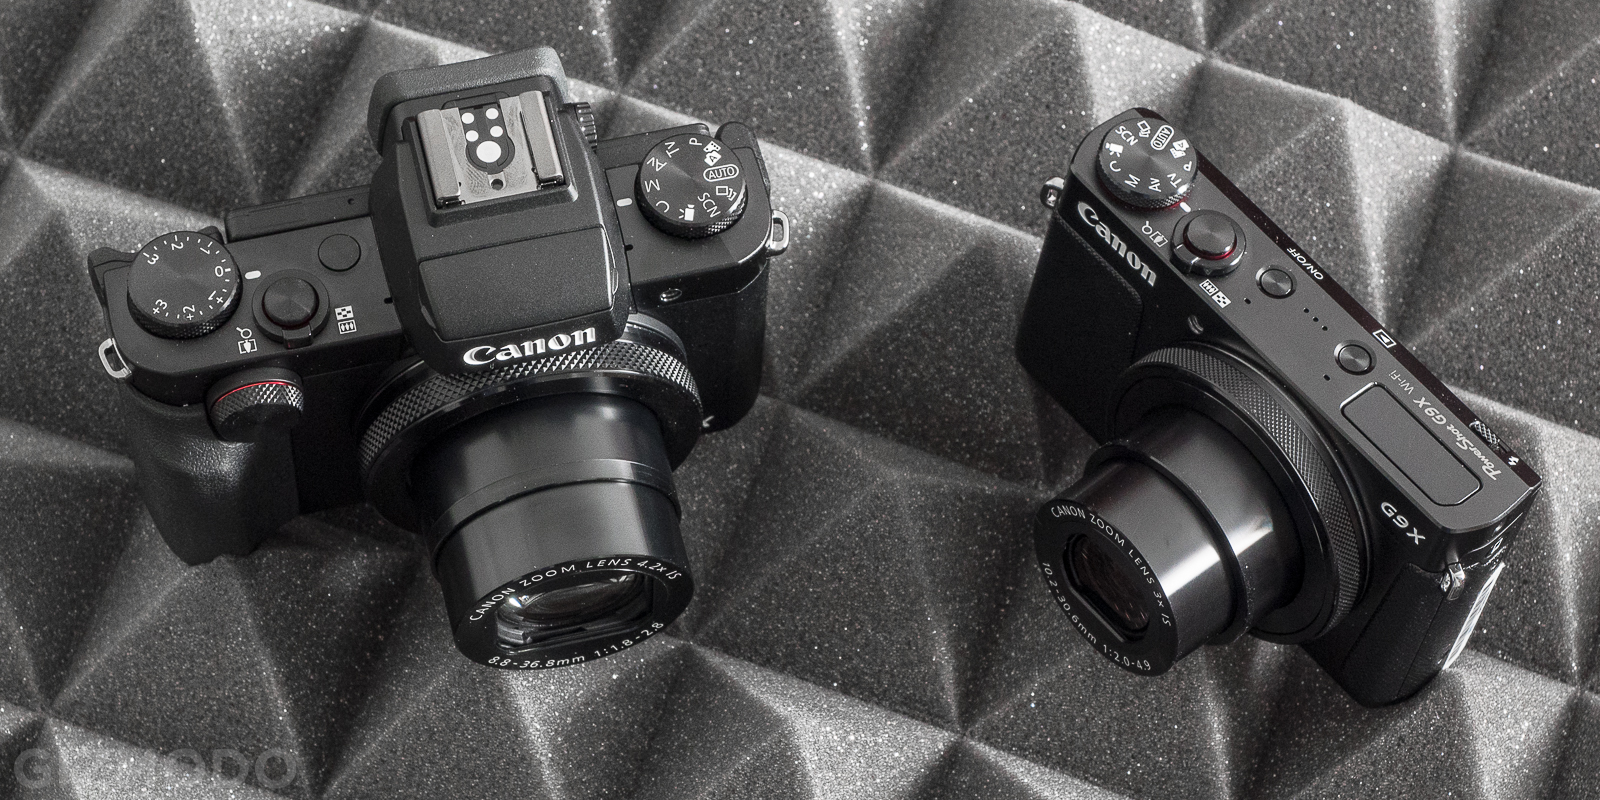 Canon’s PowerShot G9 X And G5 X Cameras: The Gizmodo Review